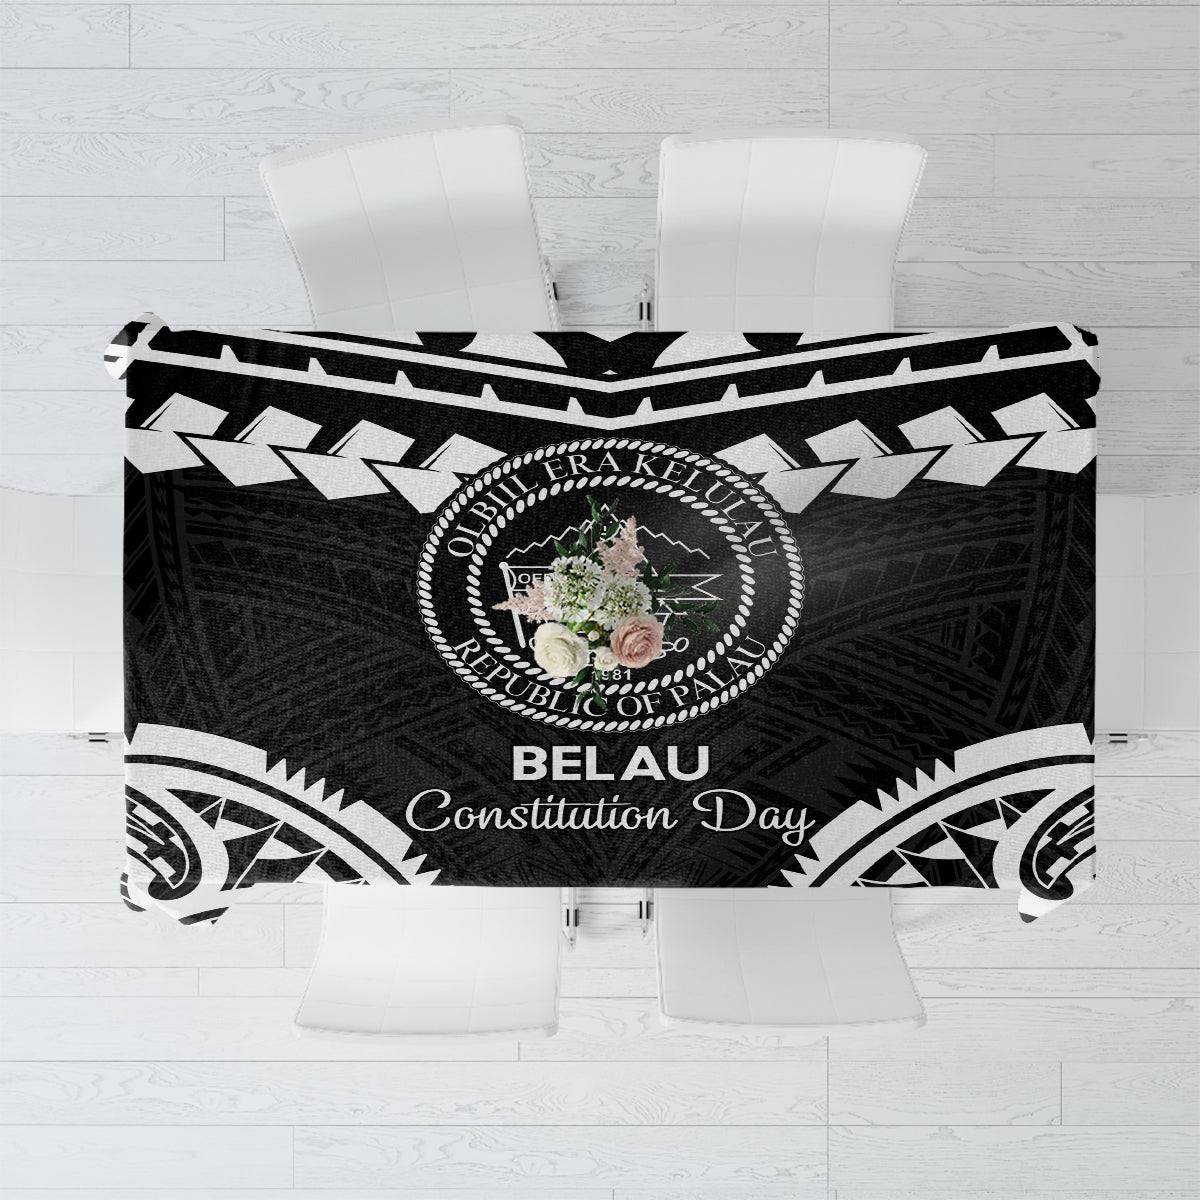 Palau Constitution Day Tablecloth Belau Seal With Polynesian Pattern - Black